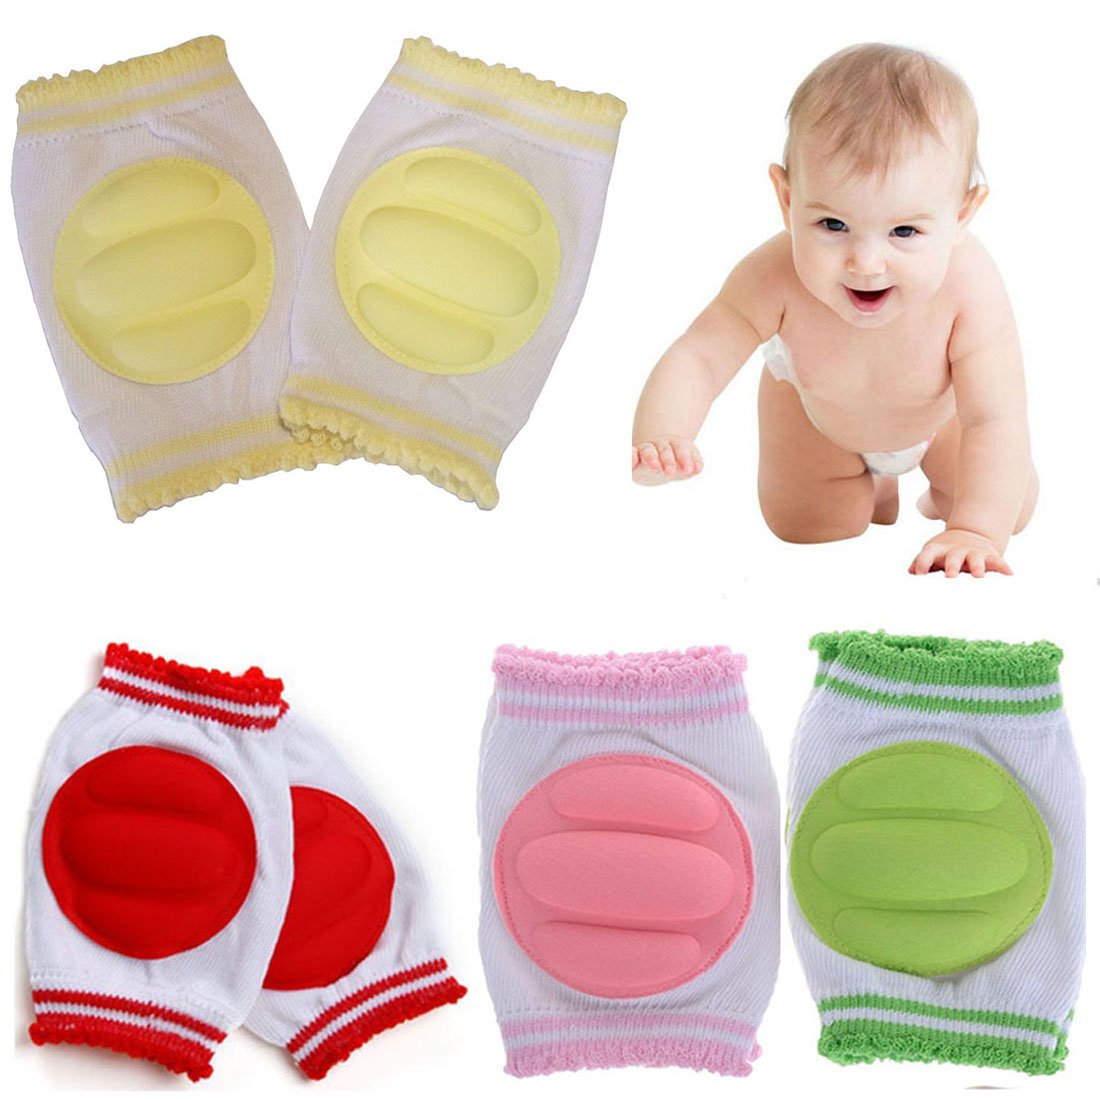 Top 9 Best Baby Knee Pads for Crawling Reviews in 2023 1